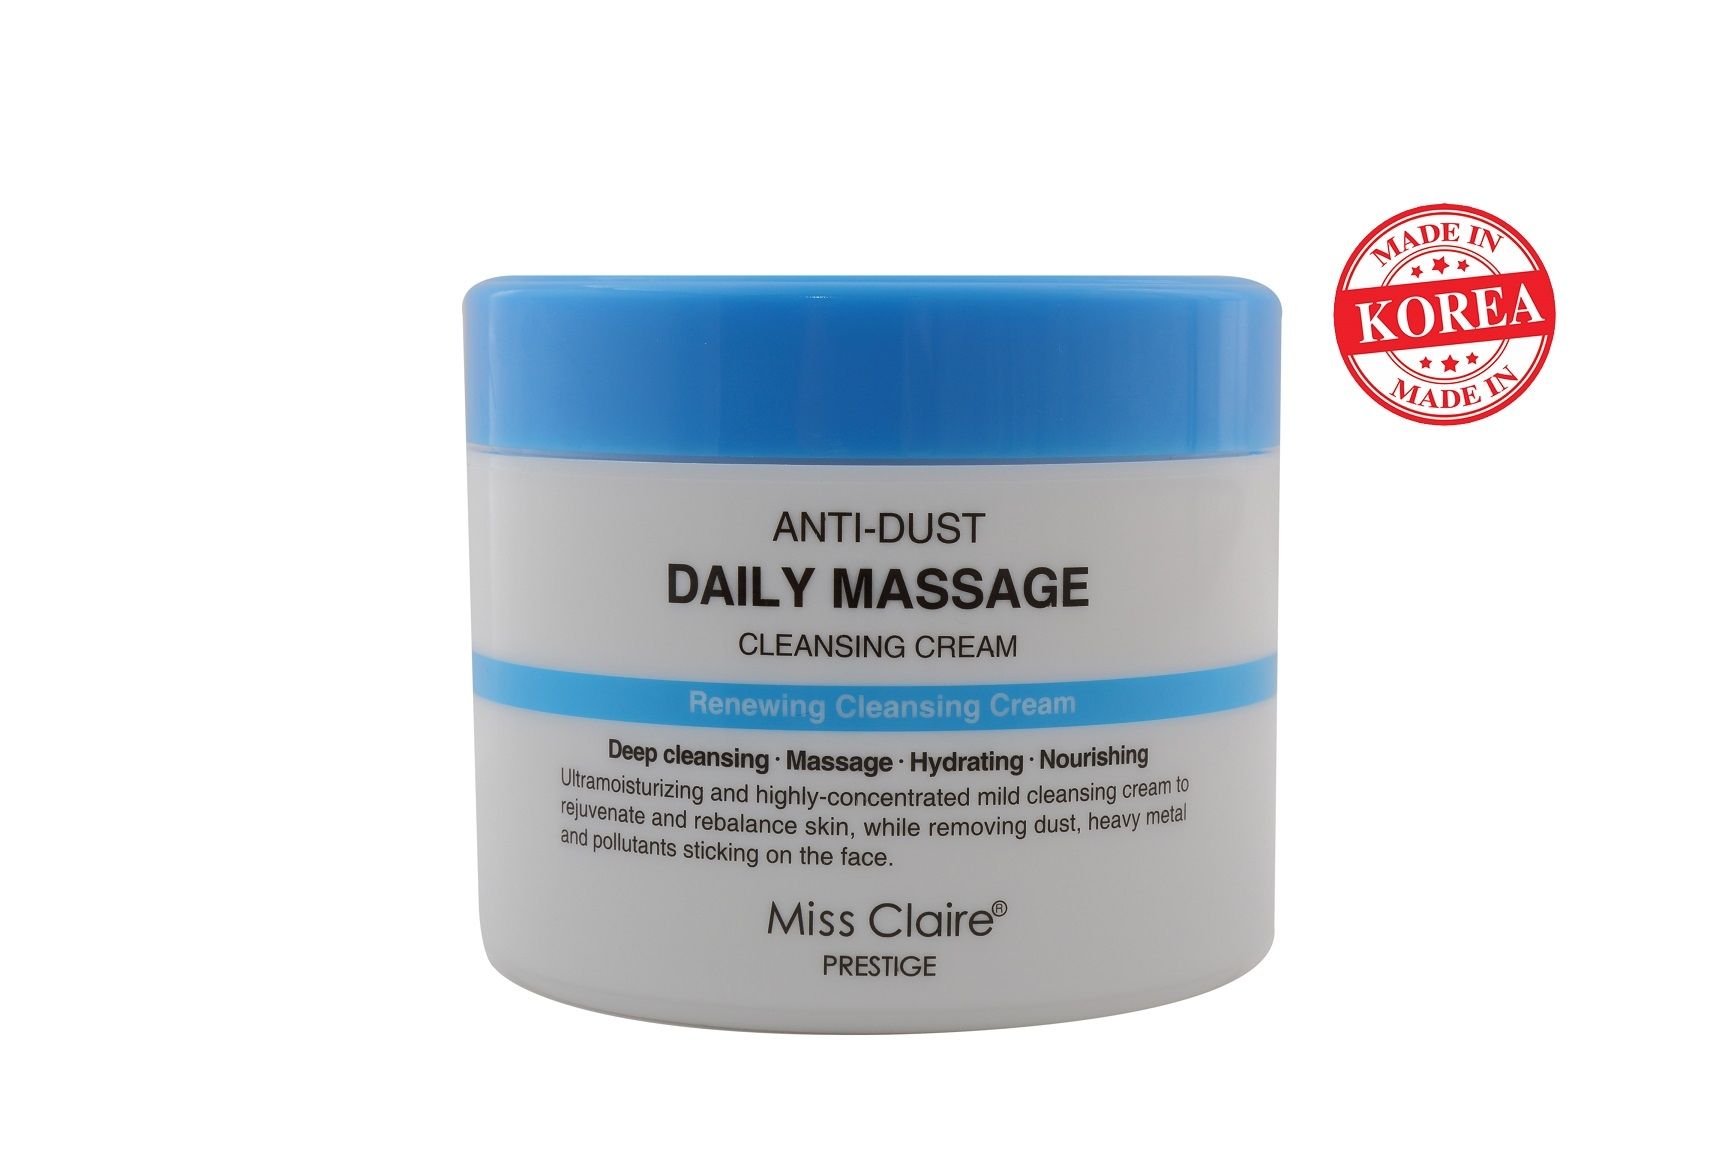 Miss Claire Prestige Anti-Dust Daily Massage Cleansing Cream